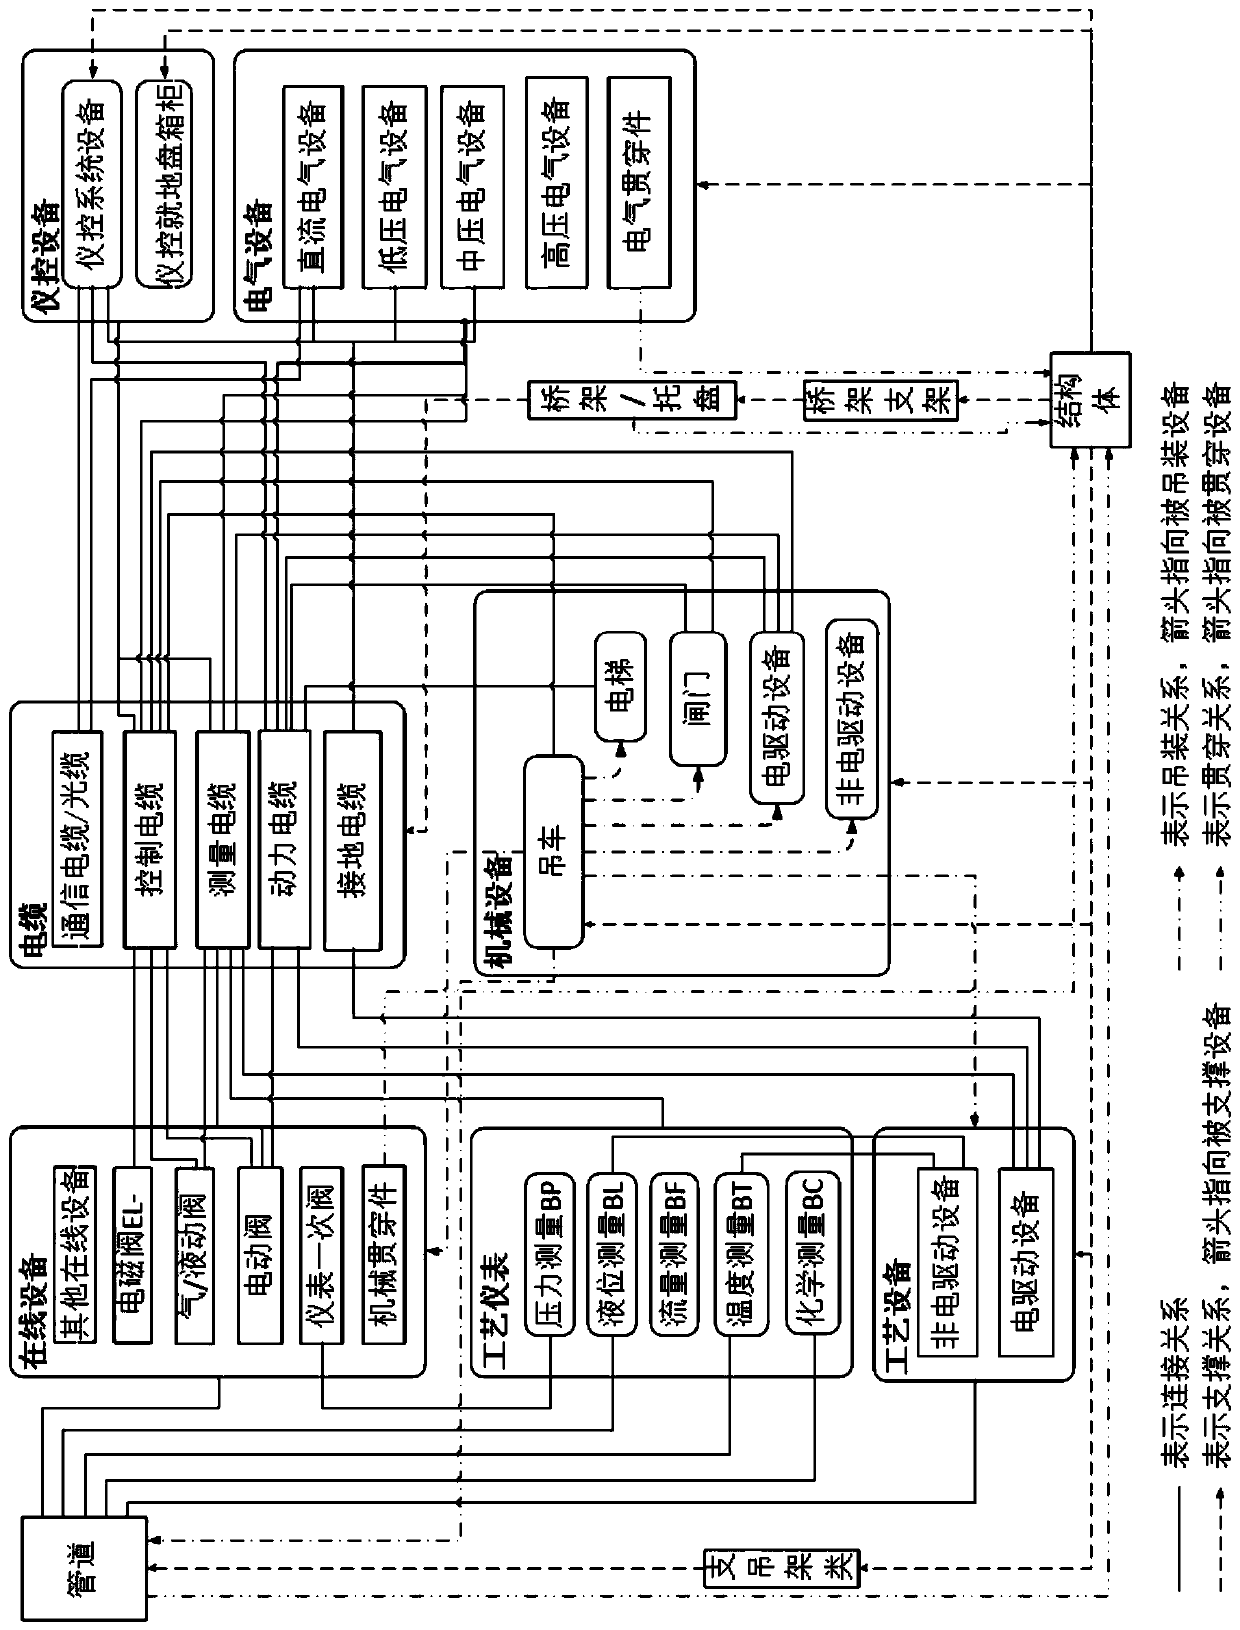 Nuclear power station equipment data combing system and method